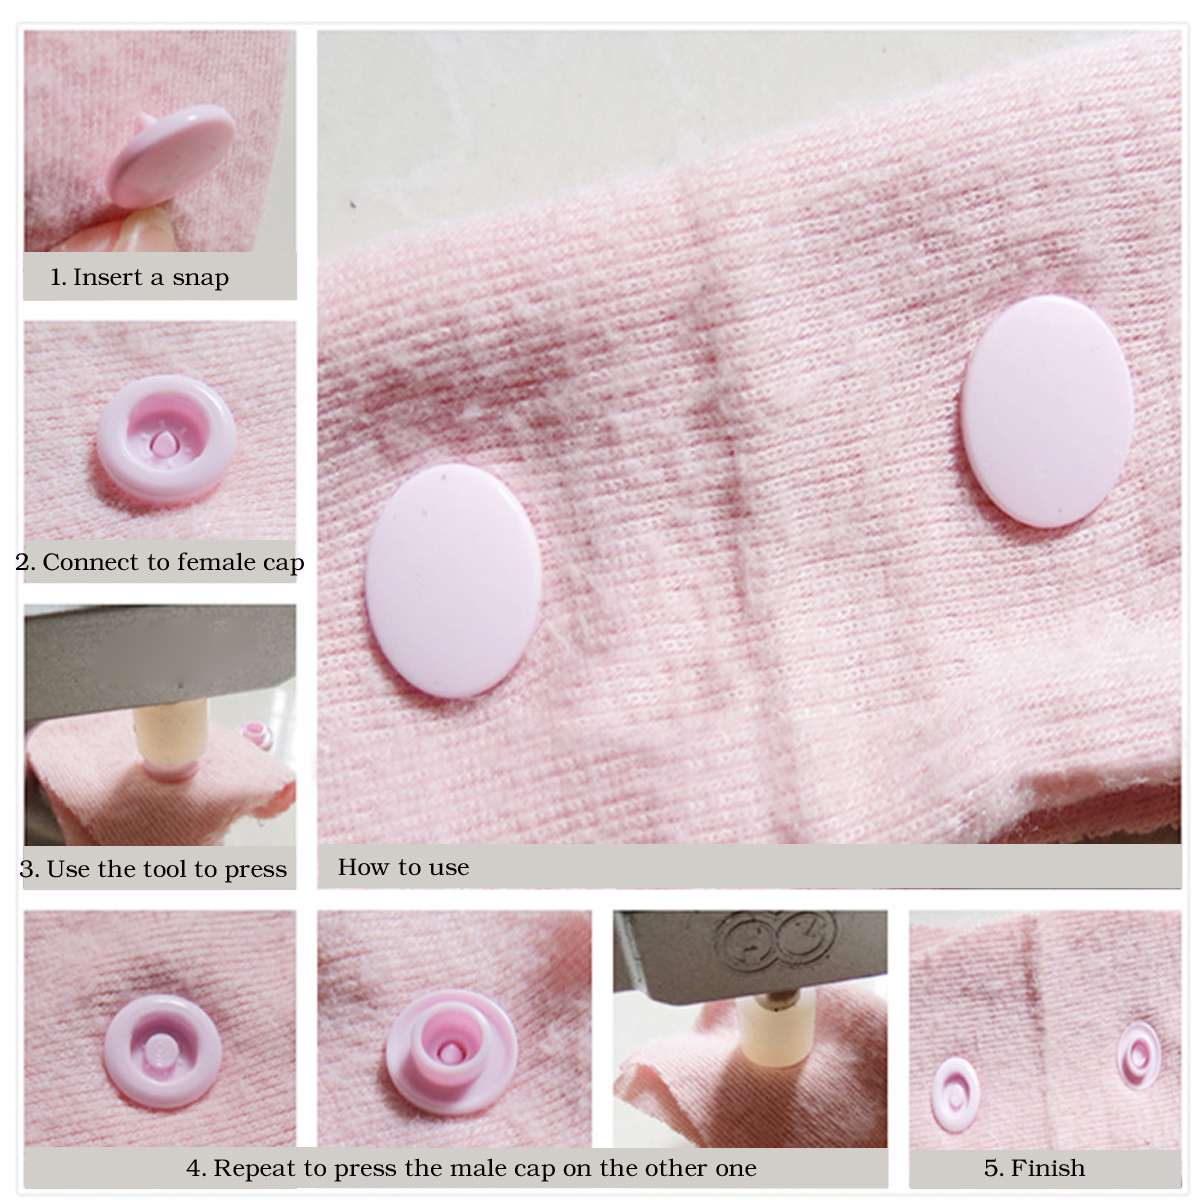 200 Sets KAM T5 for T3 T8 11.5MM Round Plastic Snaps Button Fasteners Quilt Cover Sheet Button Garment Accessories For Clothes